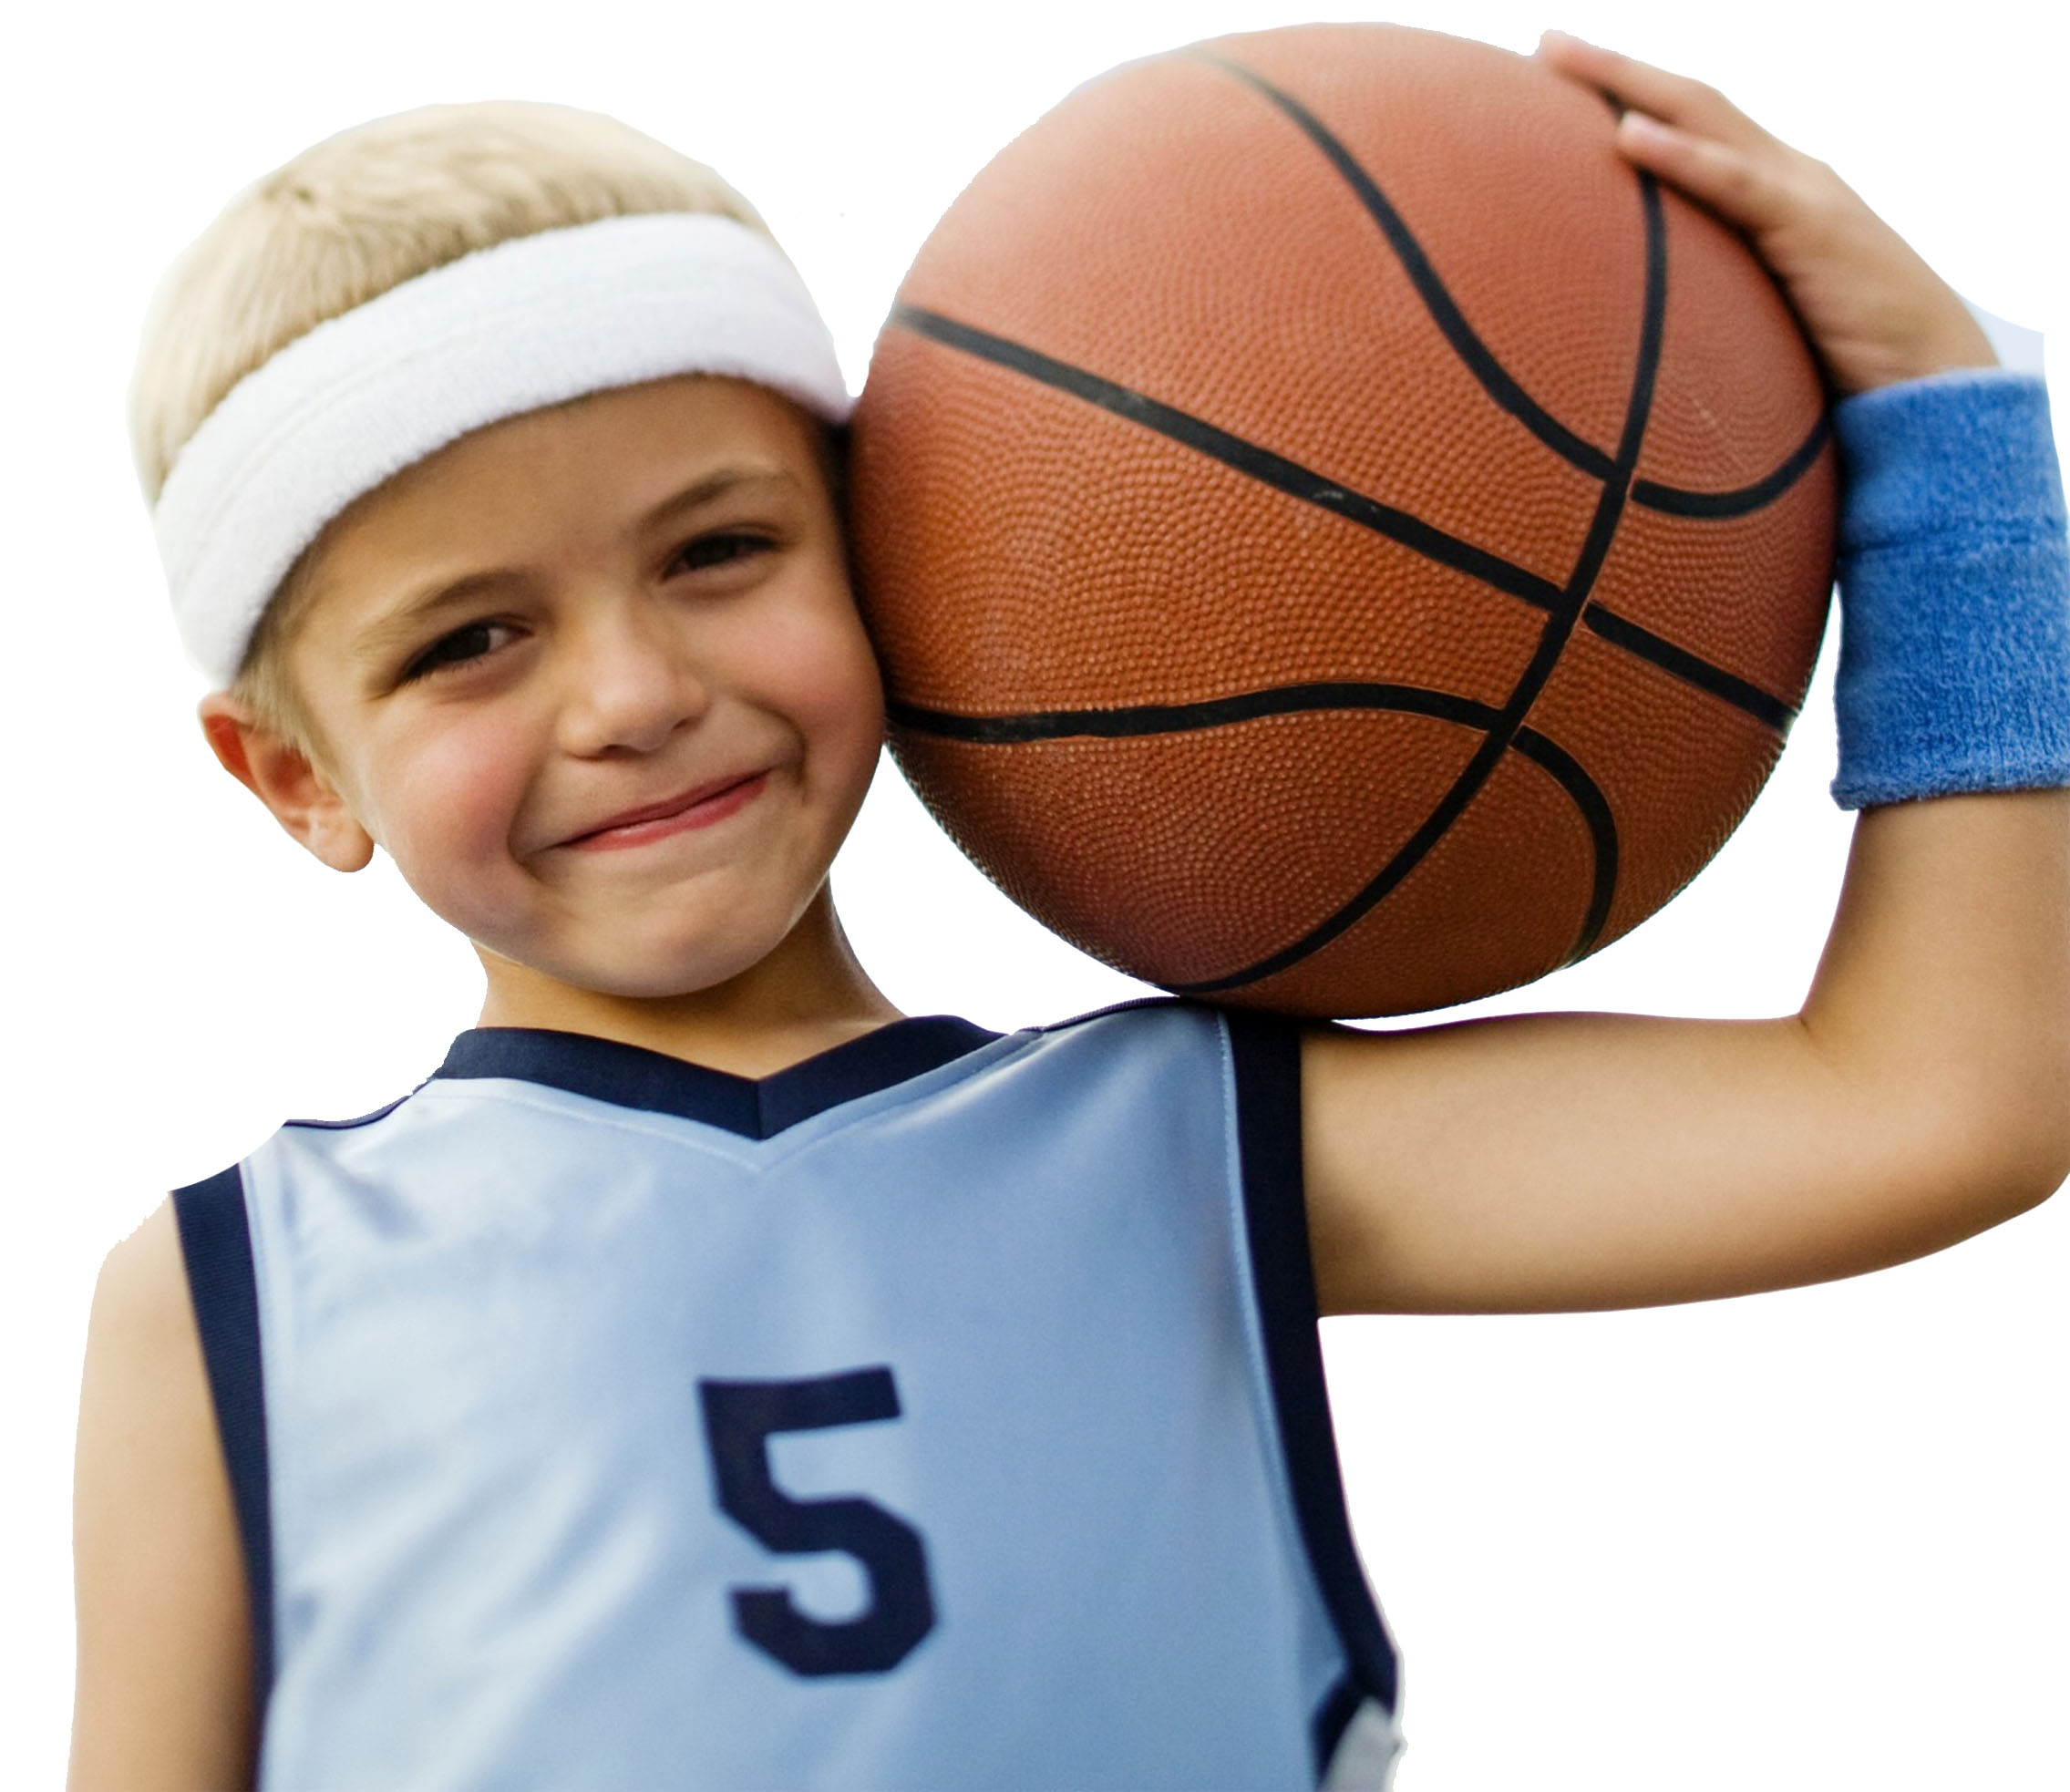 A kid wearing a number 5 jersey while holding a ball